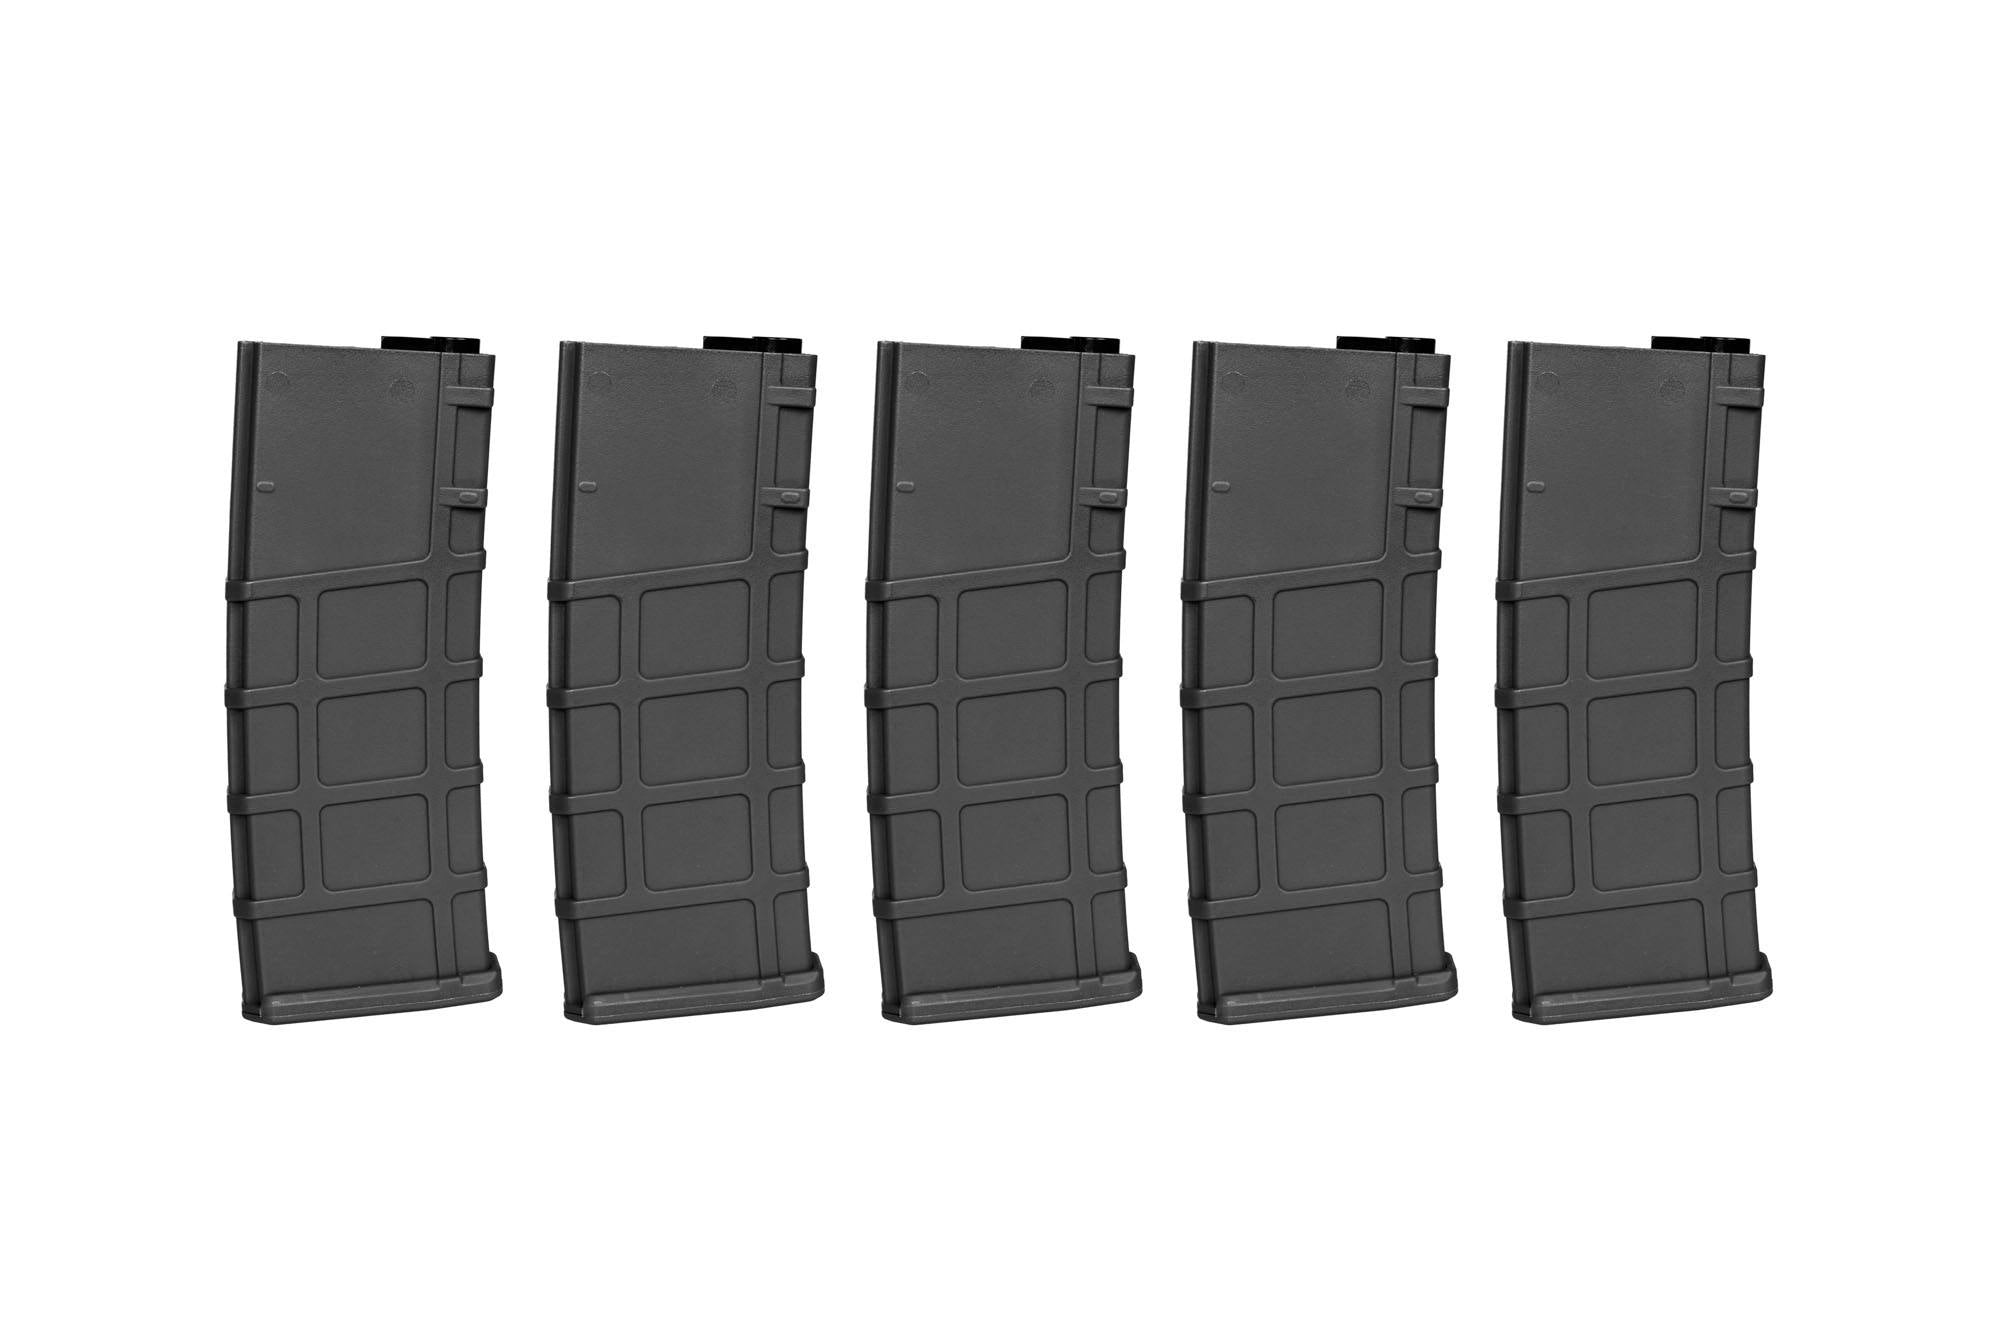 Set of 5 Polymer 200 BB's Mid-Cap magazines for M4/M16 replicas - Black